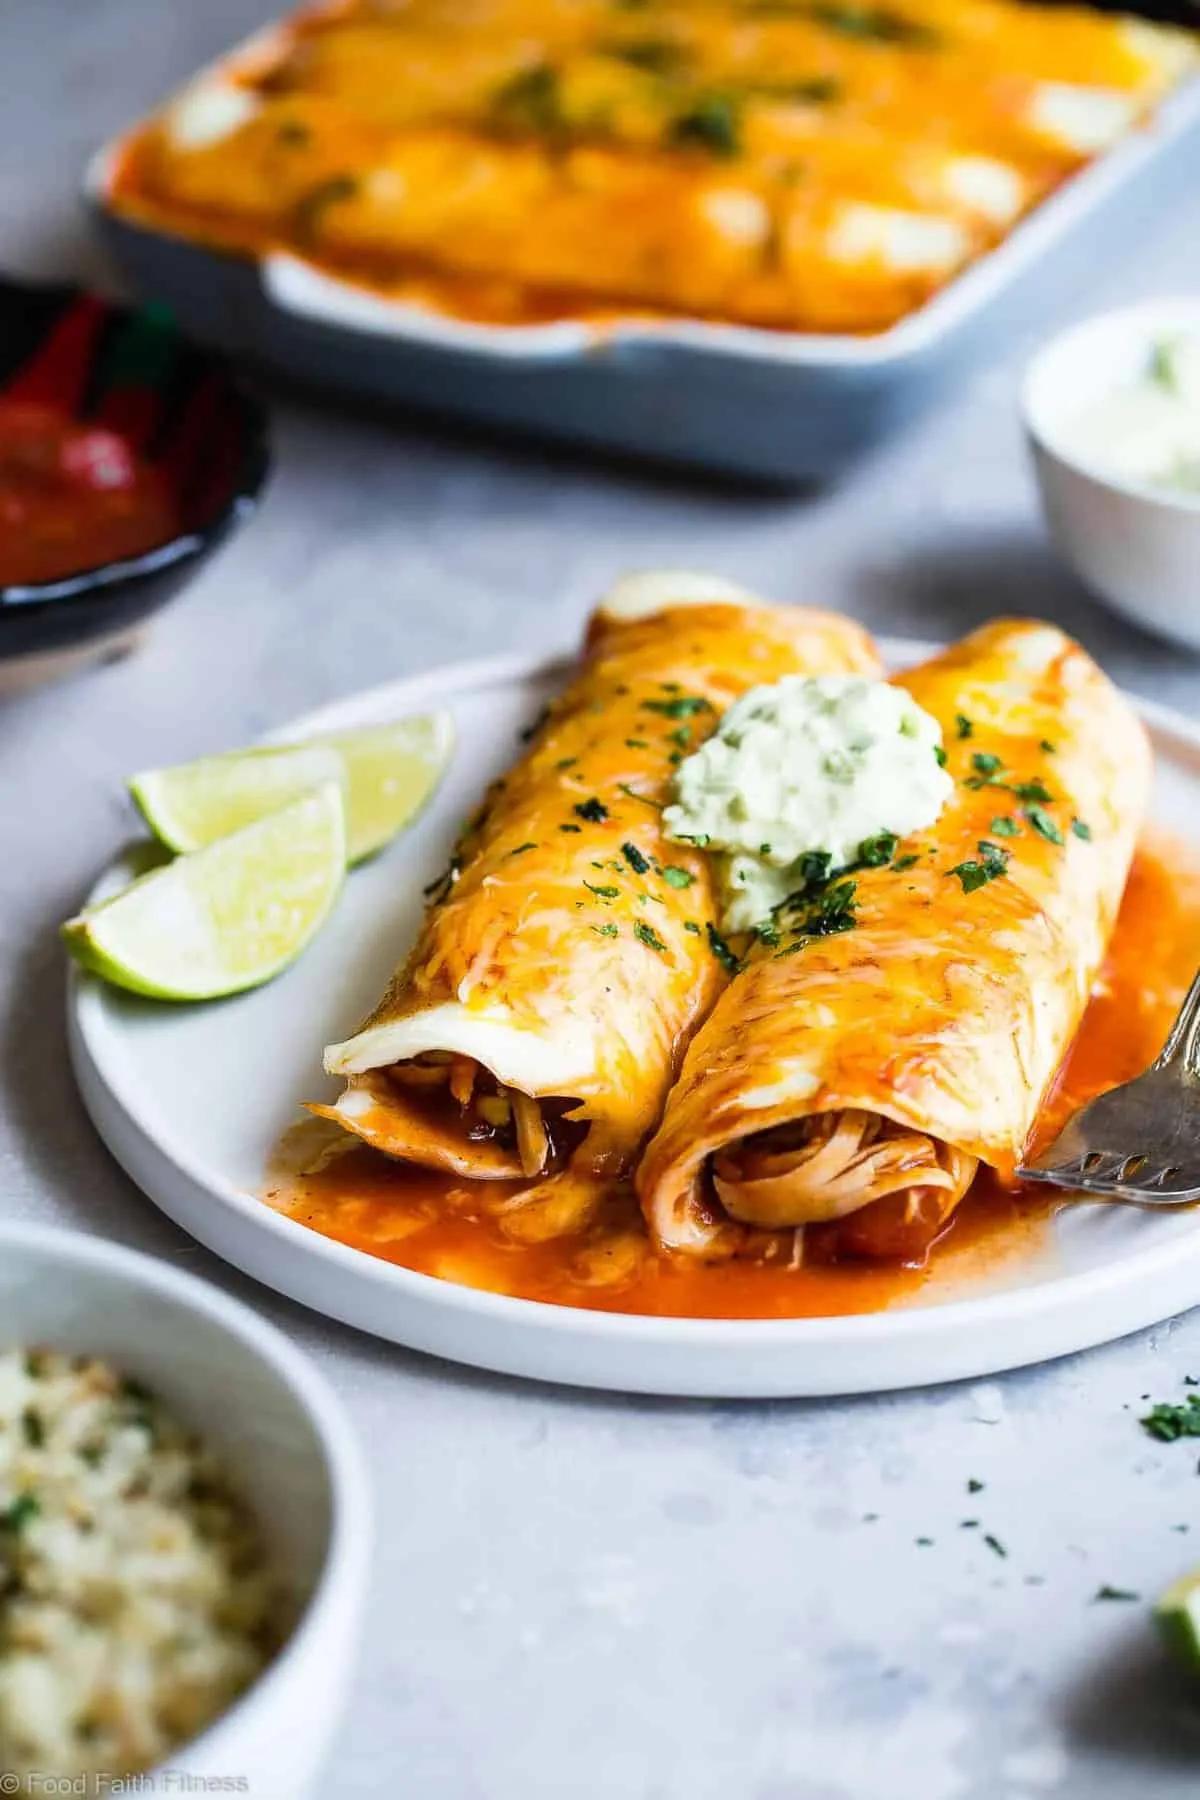 Healthy Low Carb Chicken Enchilada Recipe | Food Faith Fitness